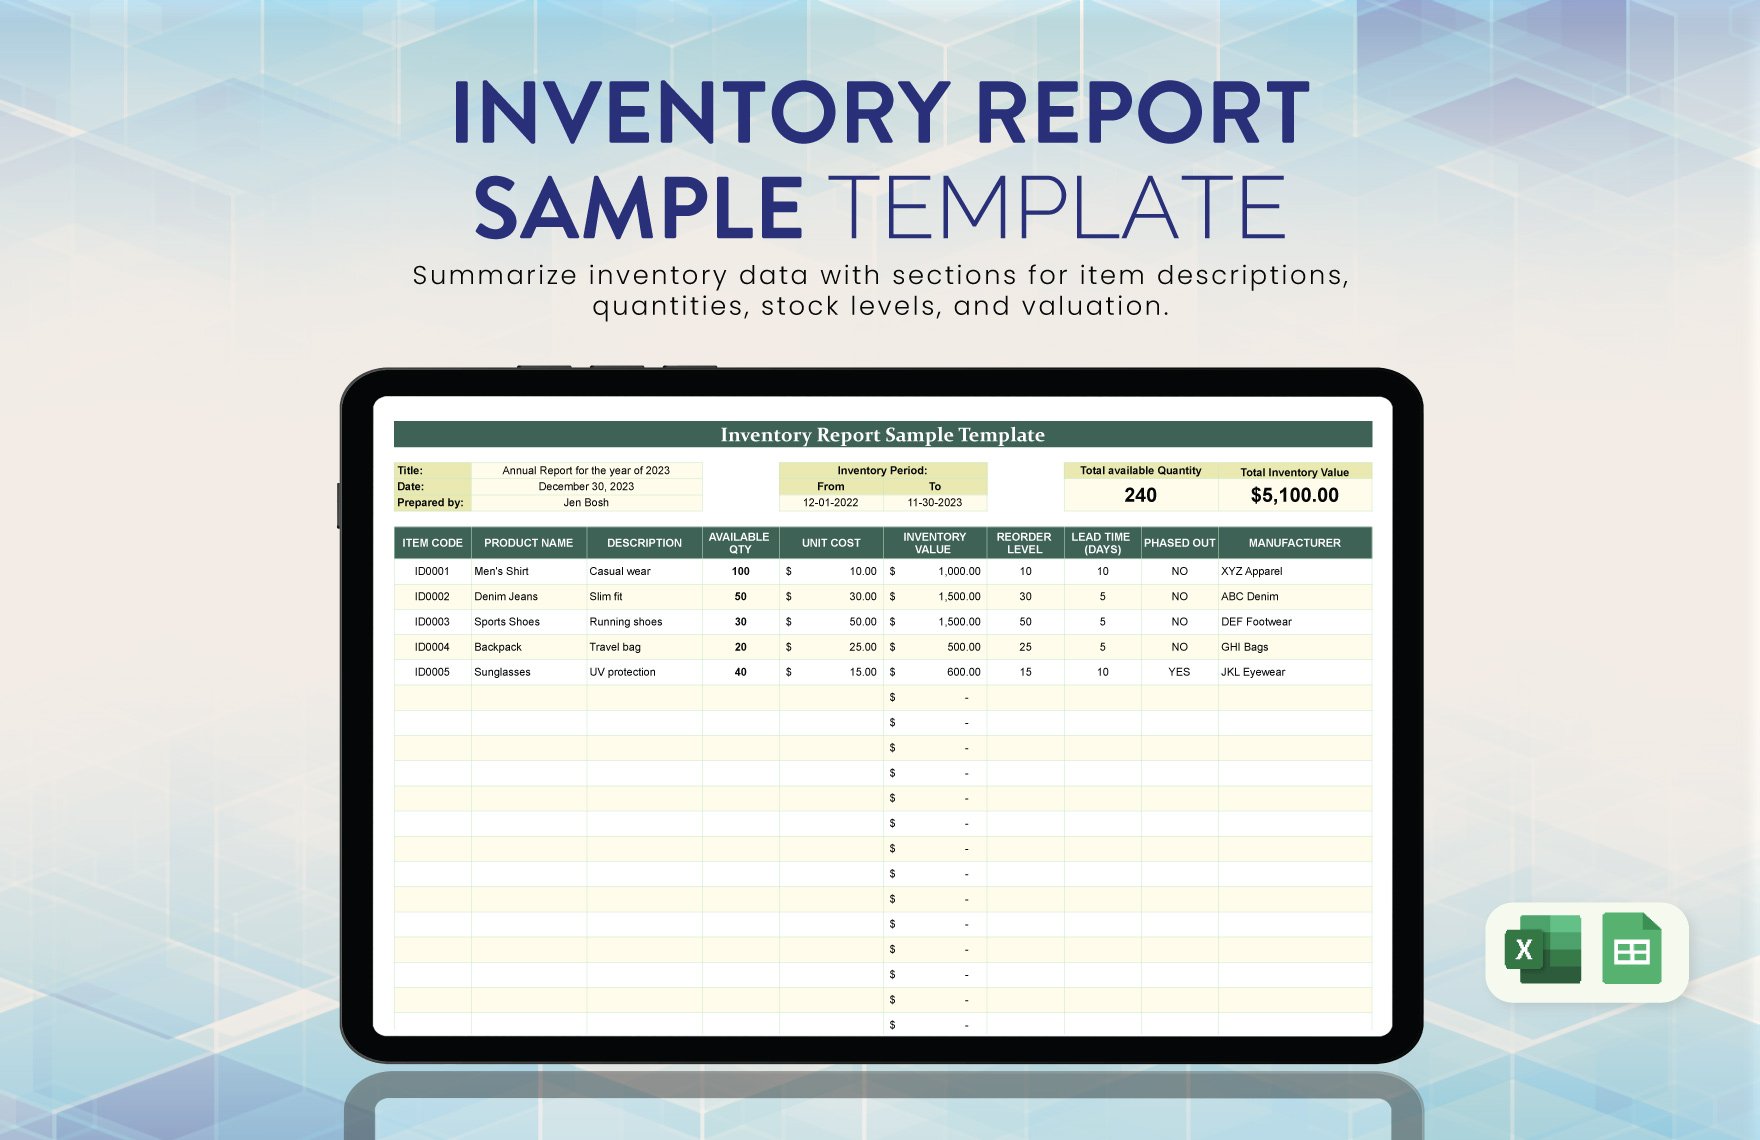 Inventory Report Sample Template in Excel, Google Sheets